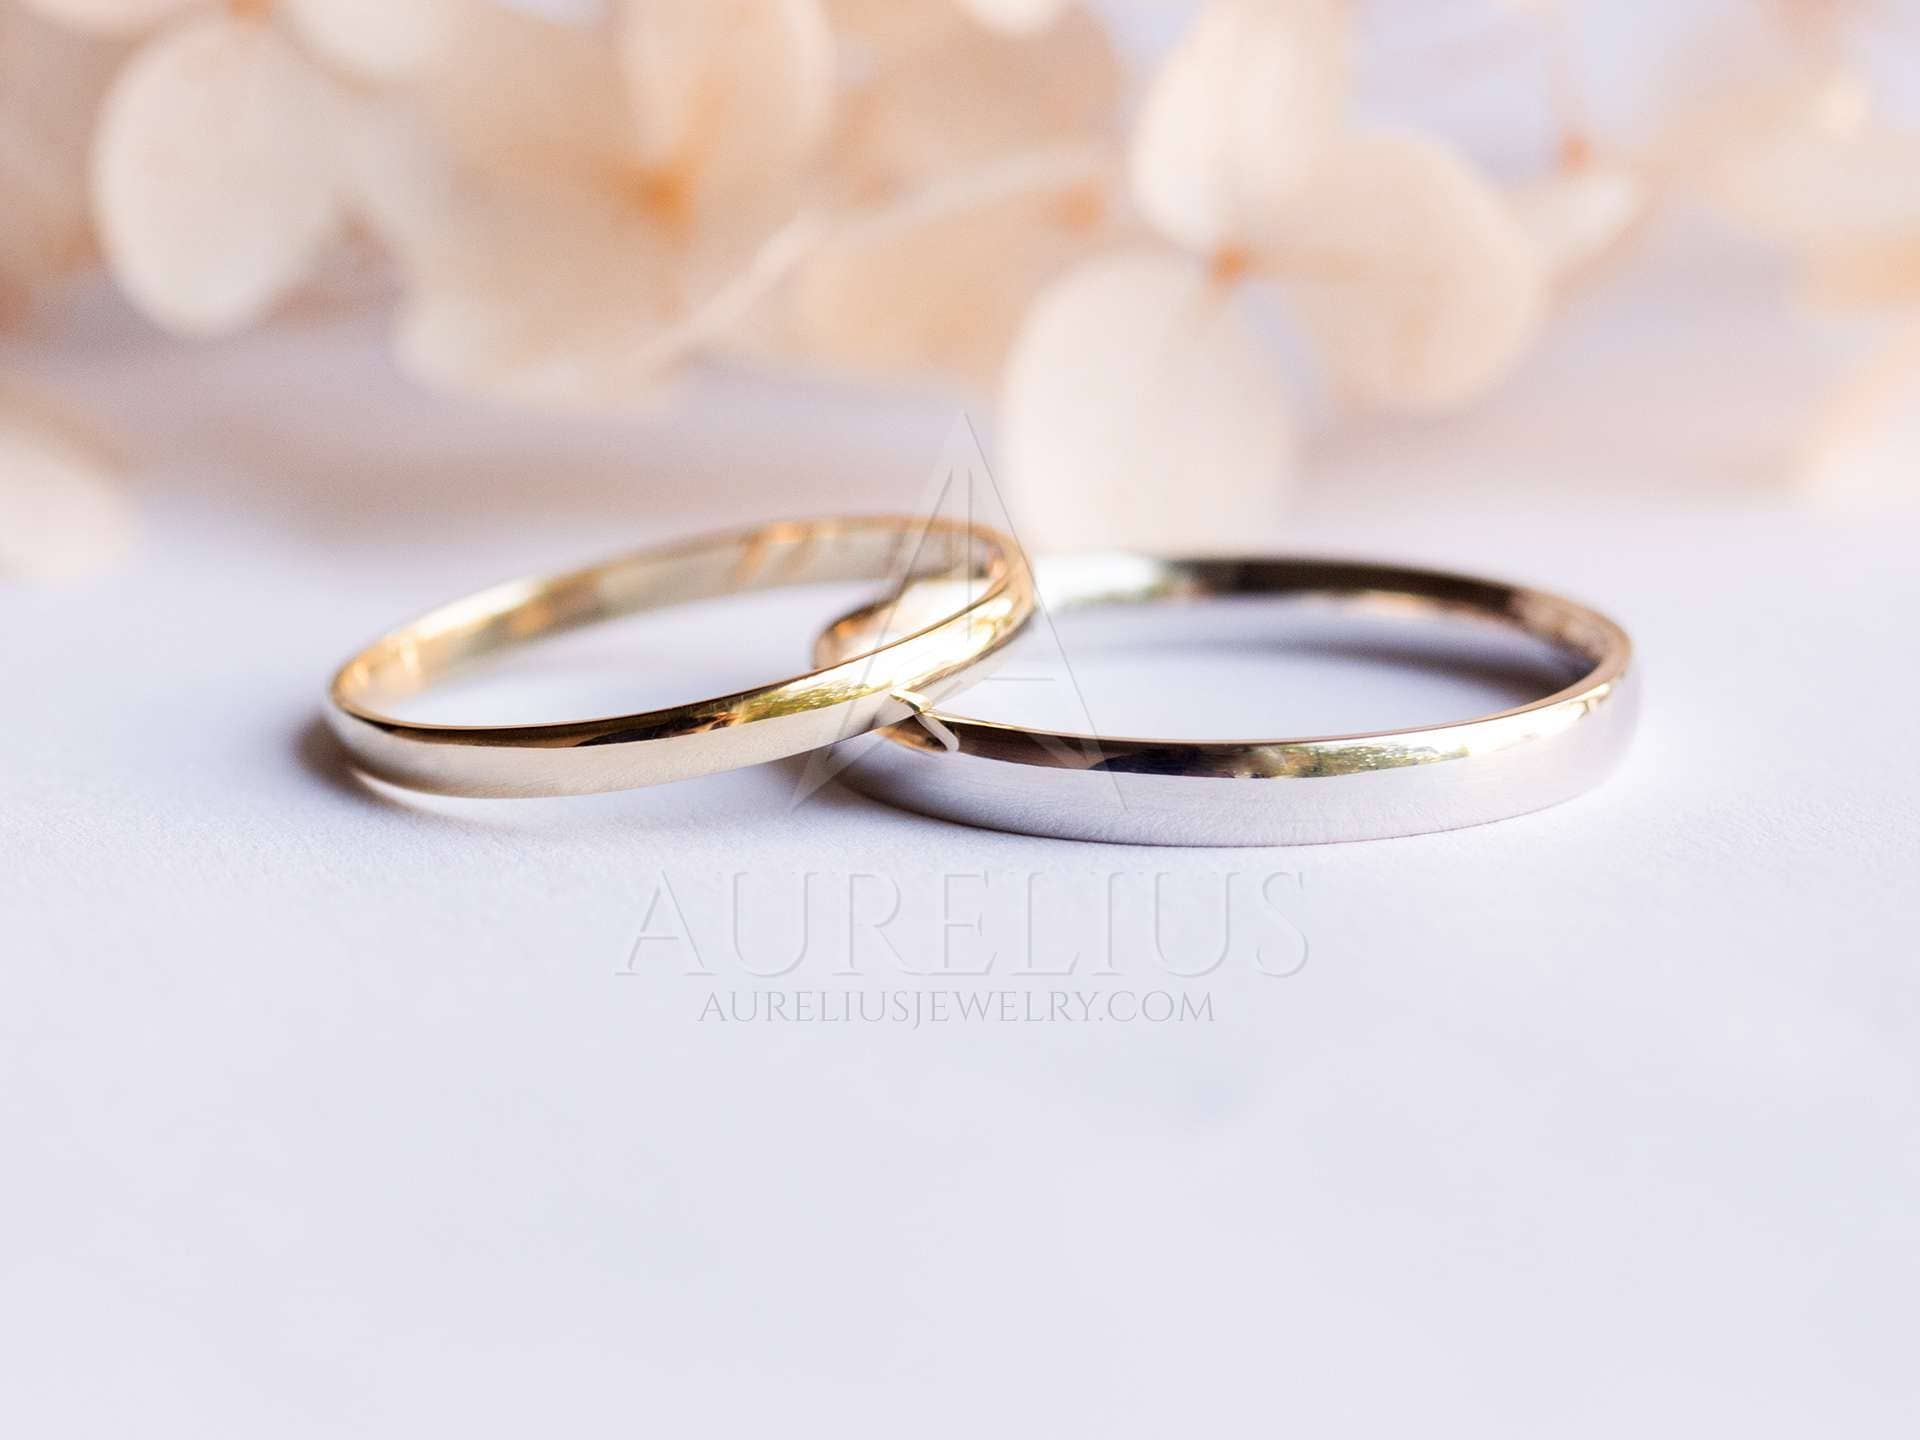 Platinum Love Bands and Rings - Couple Rings